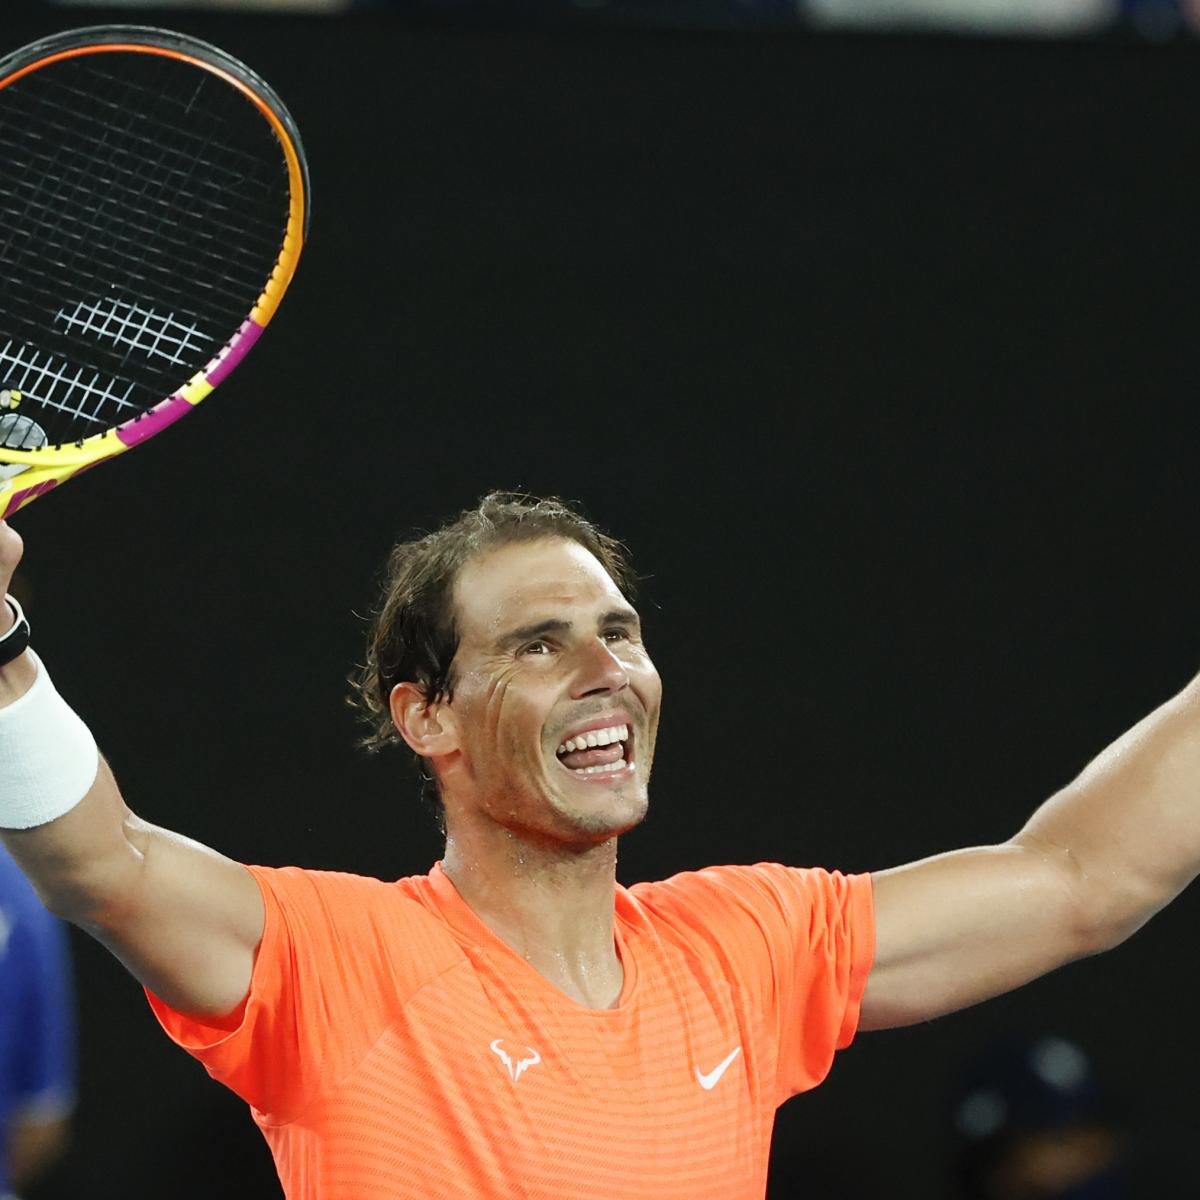 Rafael Nadal Tops Cameron Norrie, Advances to 4th Round at ...